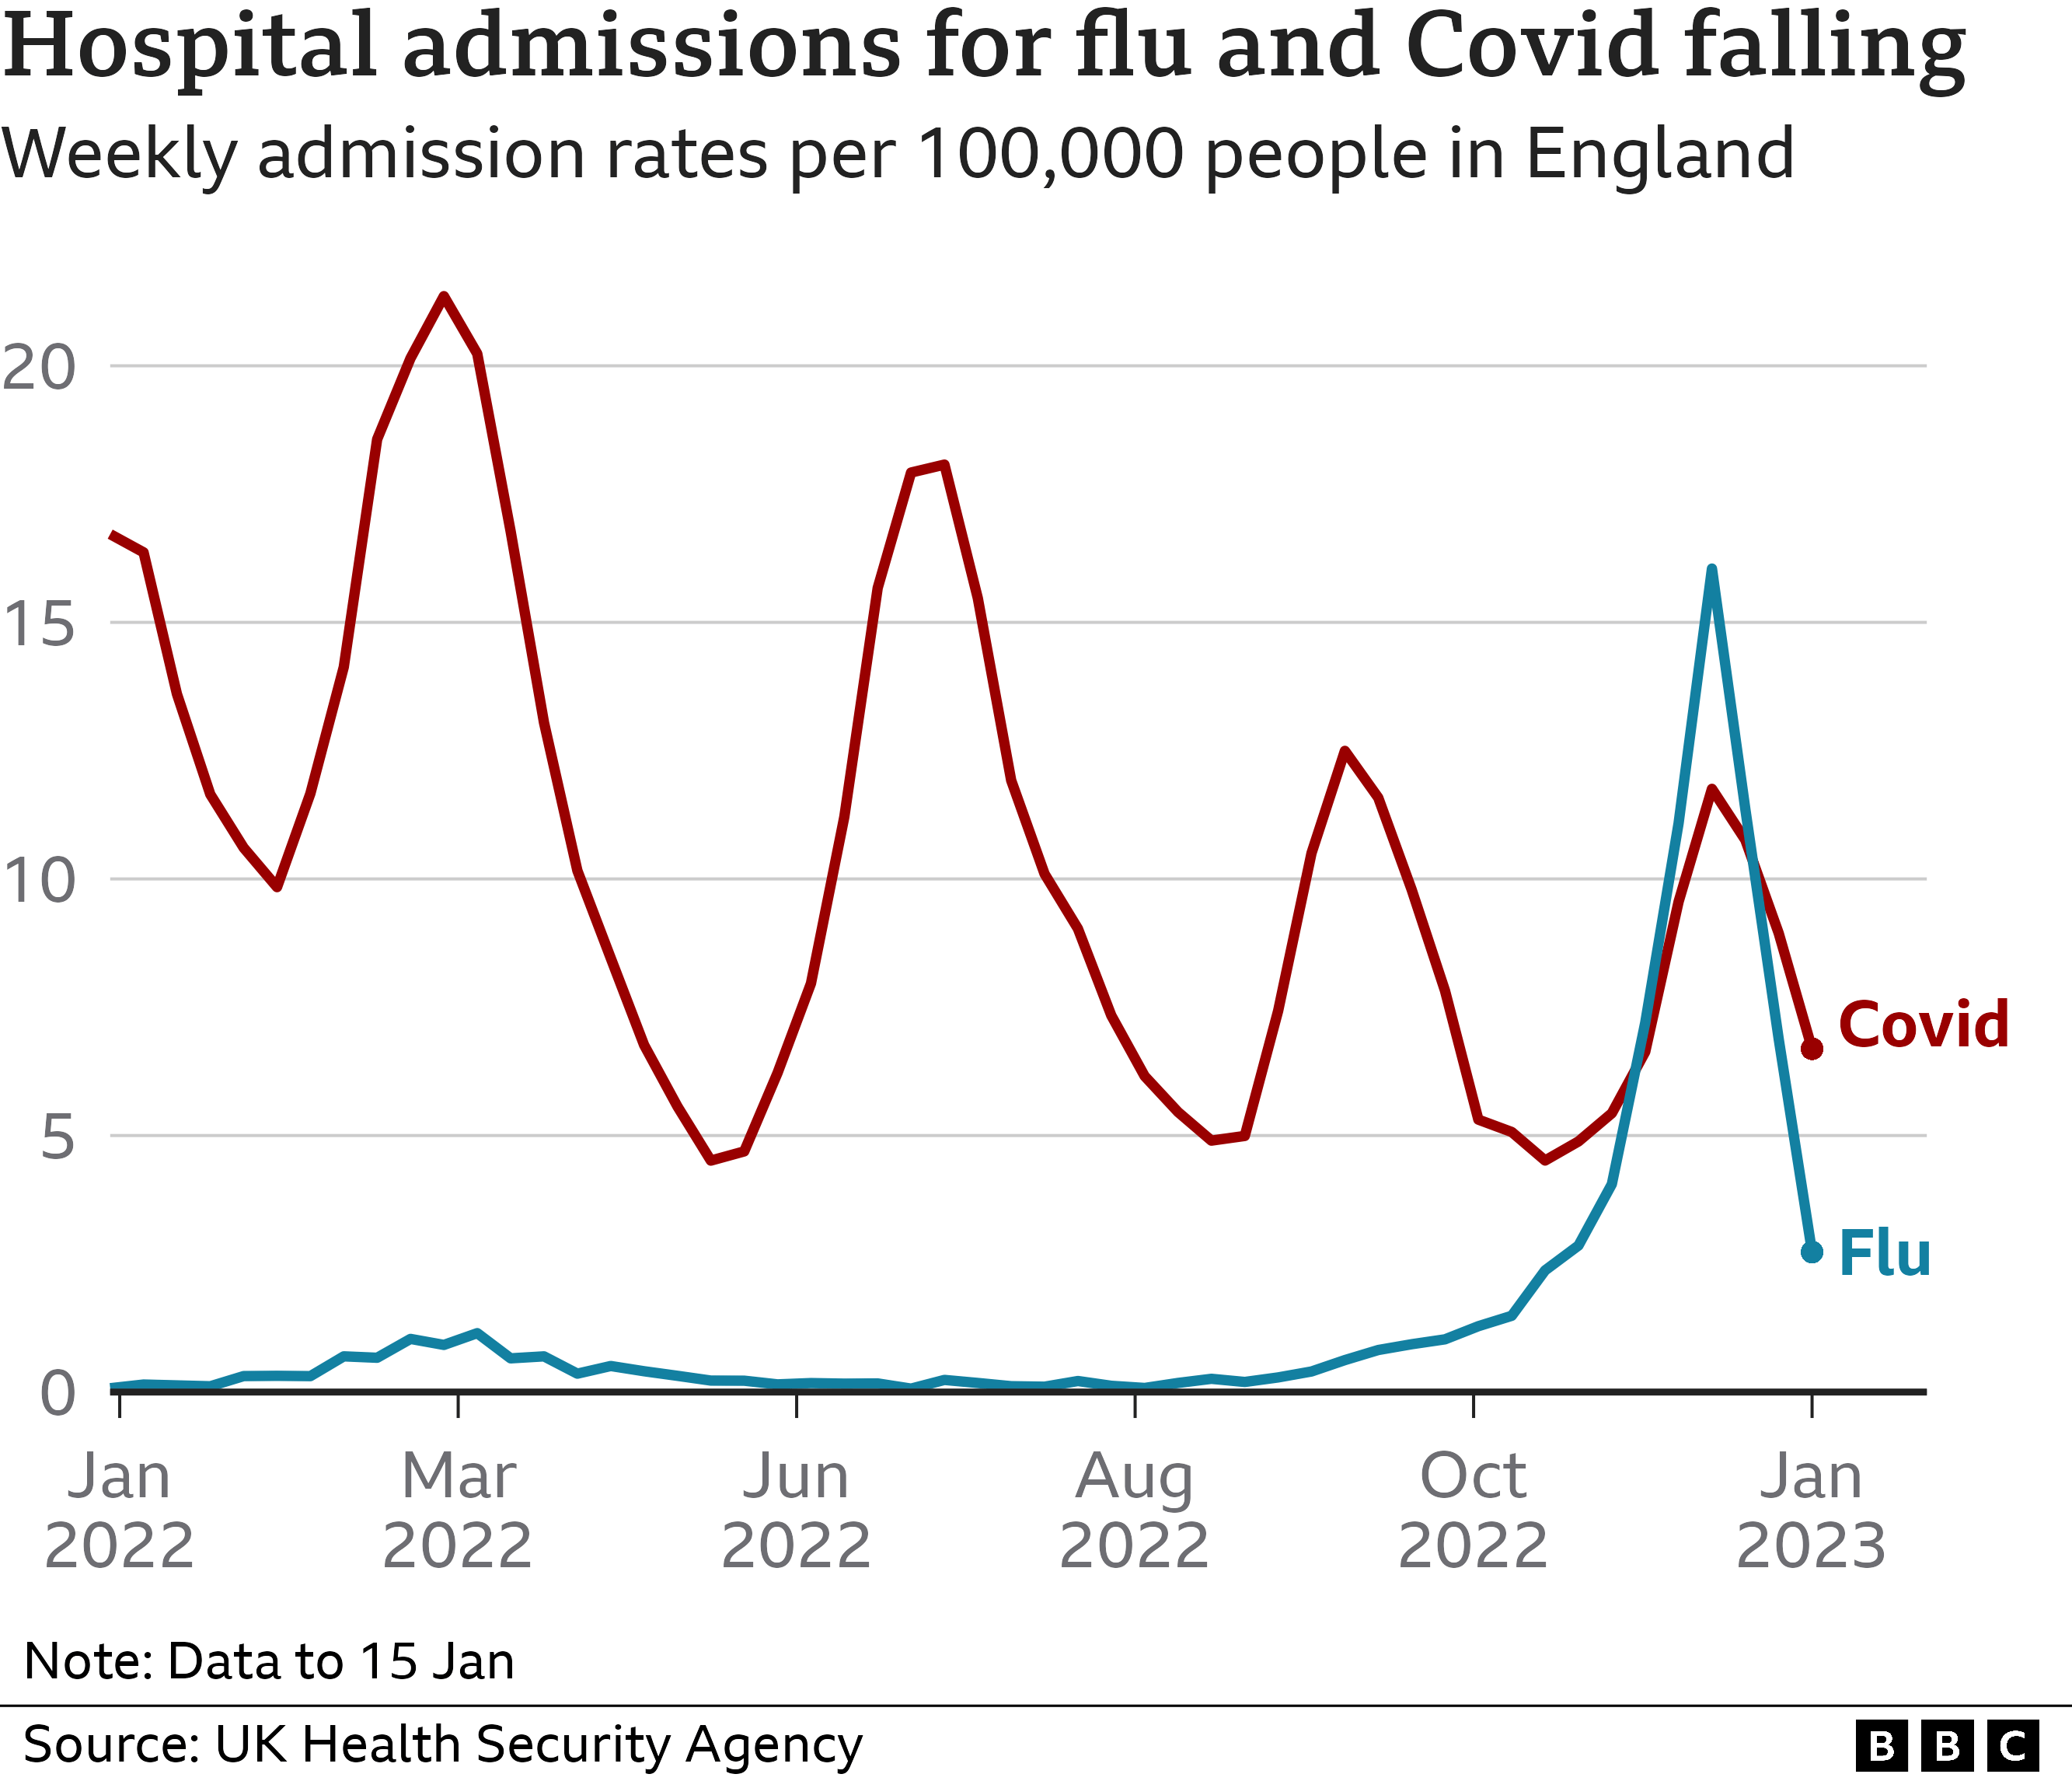 Chart showing Covid and flu admission rates